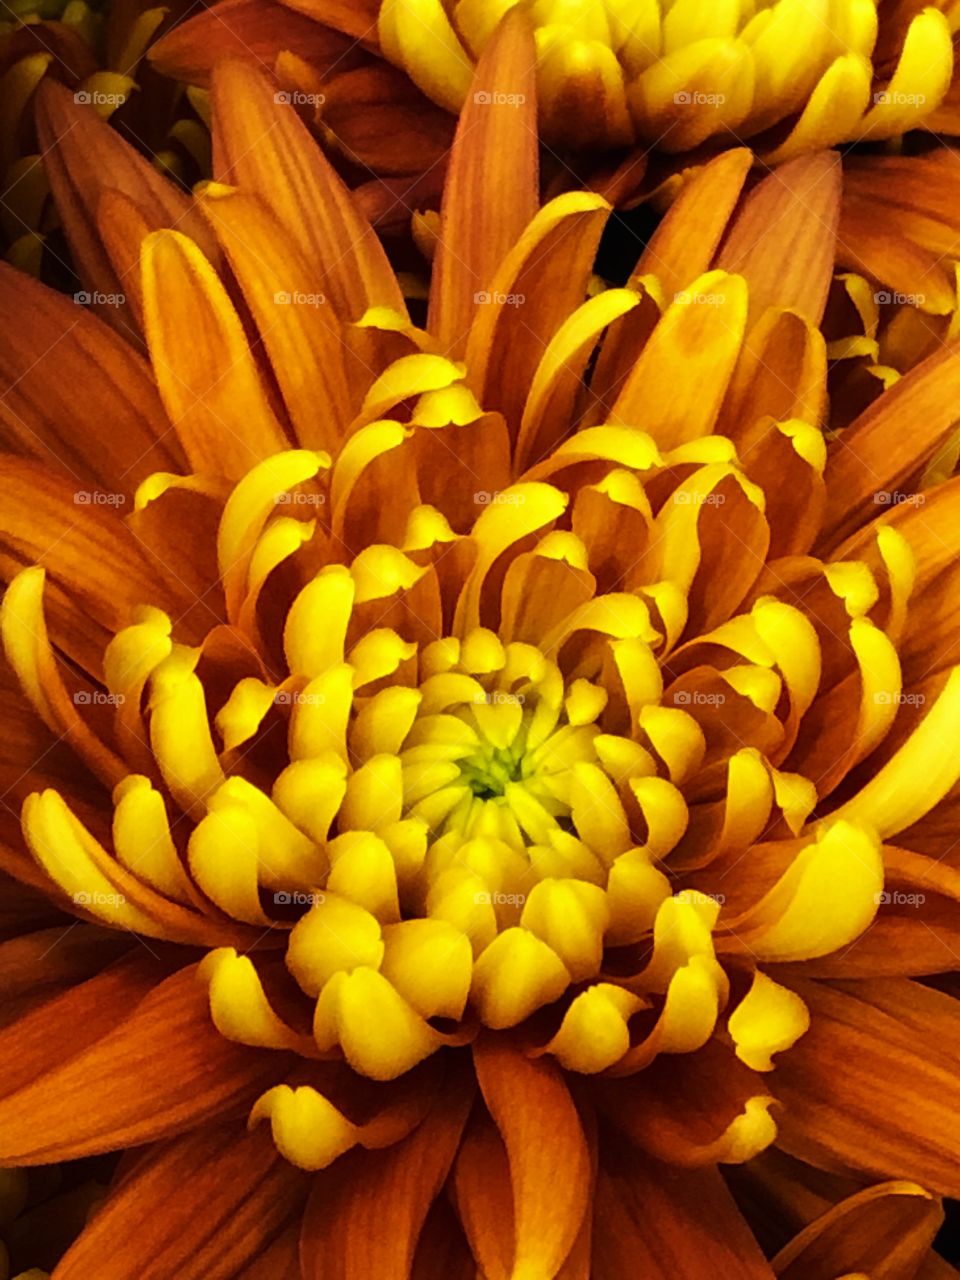 Looking close, inside a Chrysanthemums, we can get an explosion of color and texture. The perfection of the petals, and the delicate details of it. 